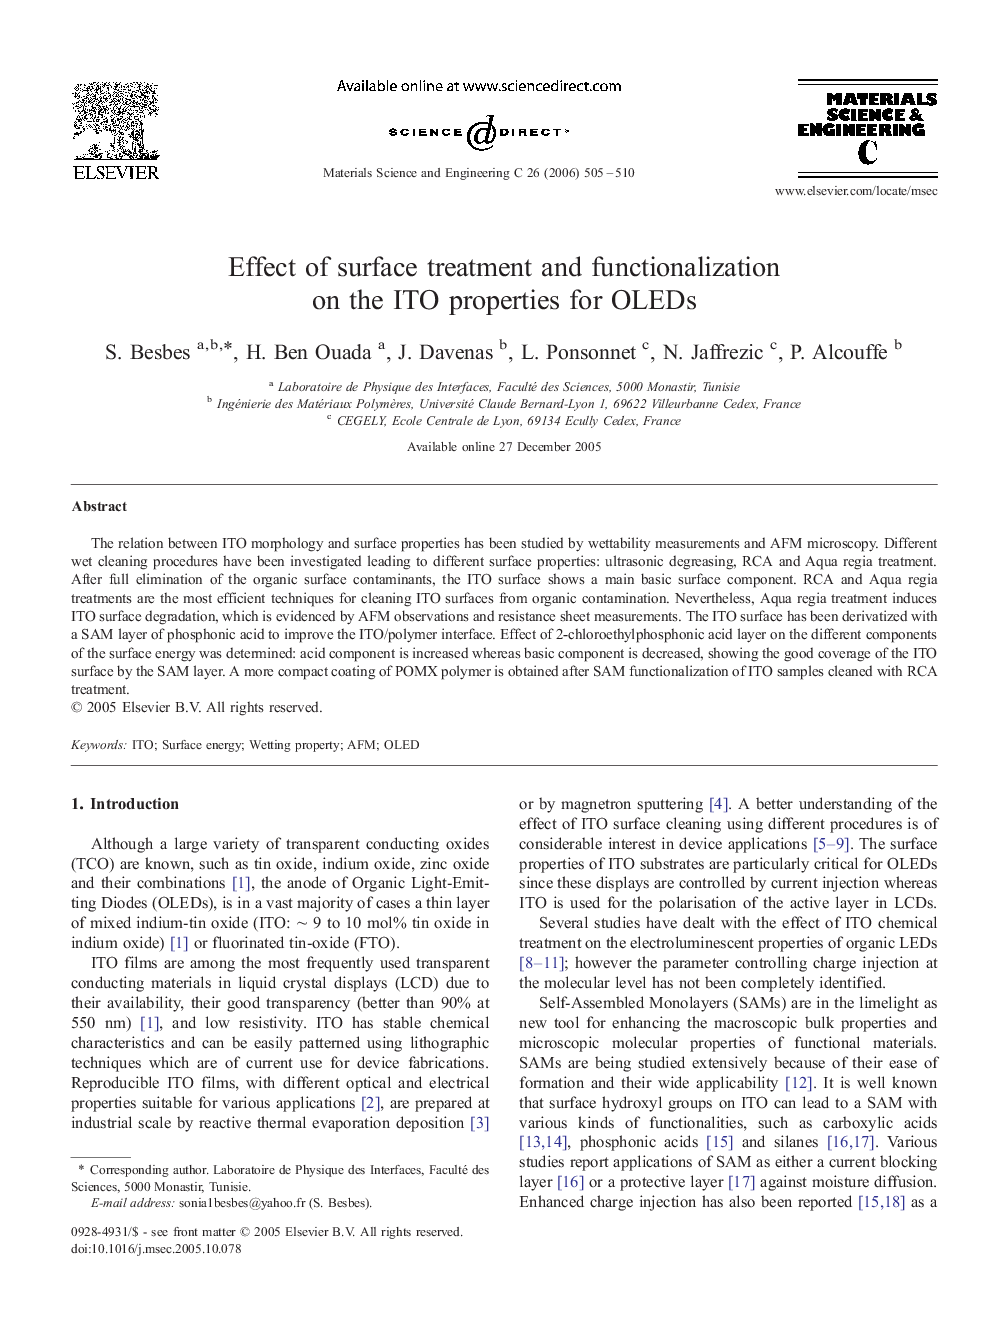 Effect of surface treatment and functionalization on the ITO properties for OLEDs